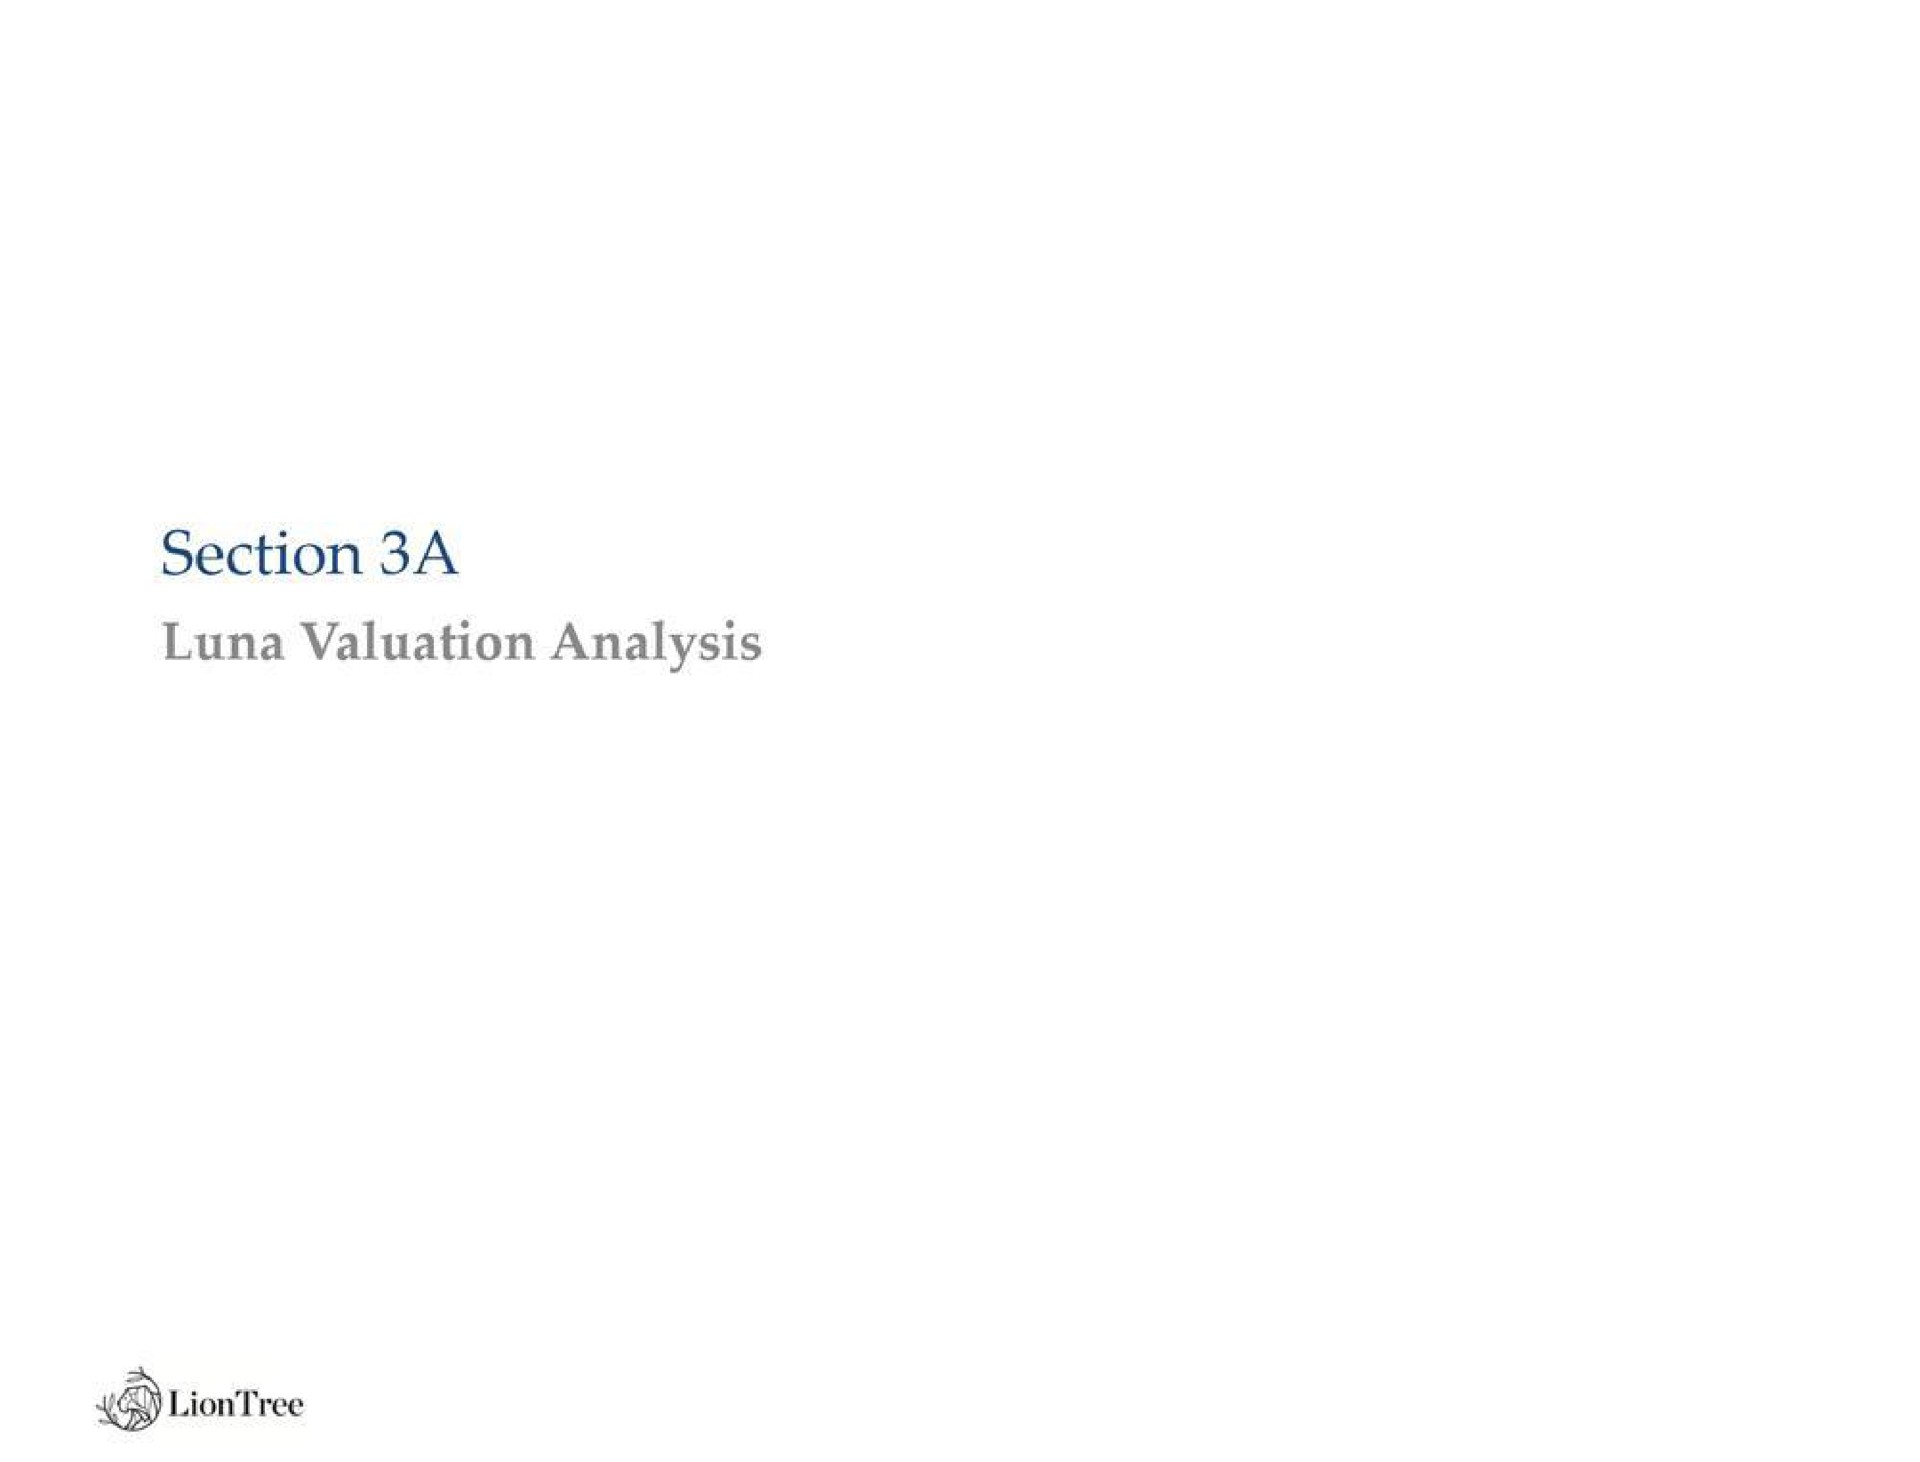 section a luna valuation analysis | LionTree